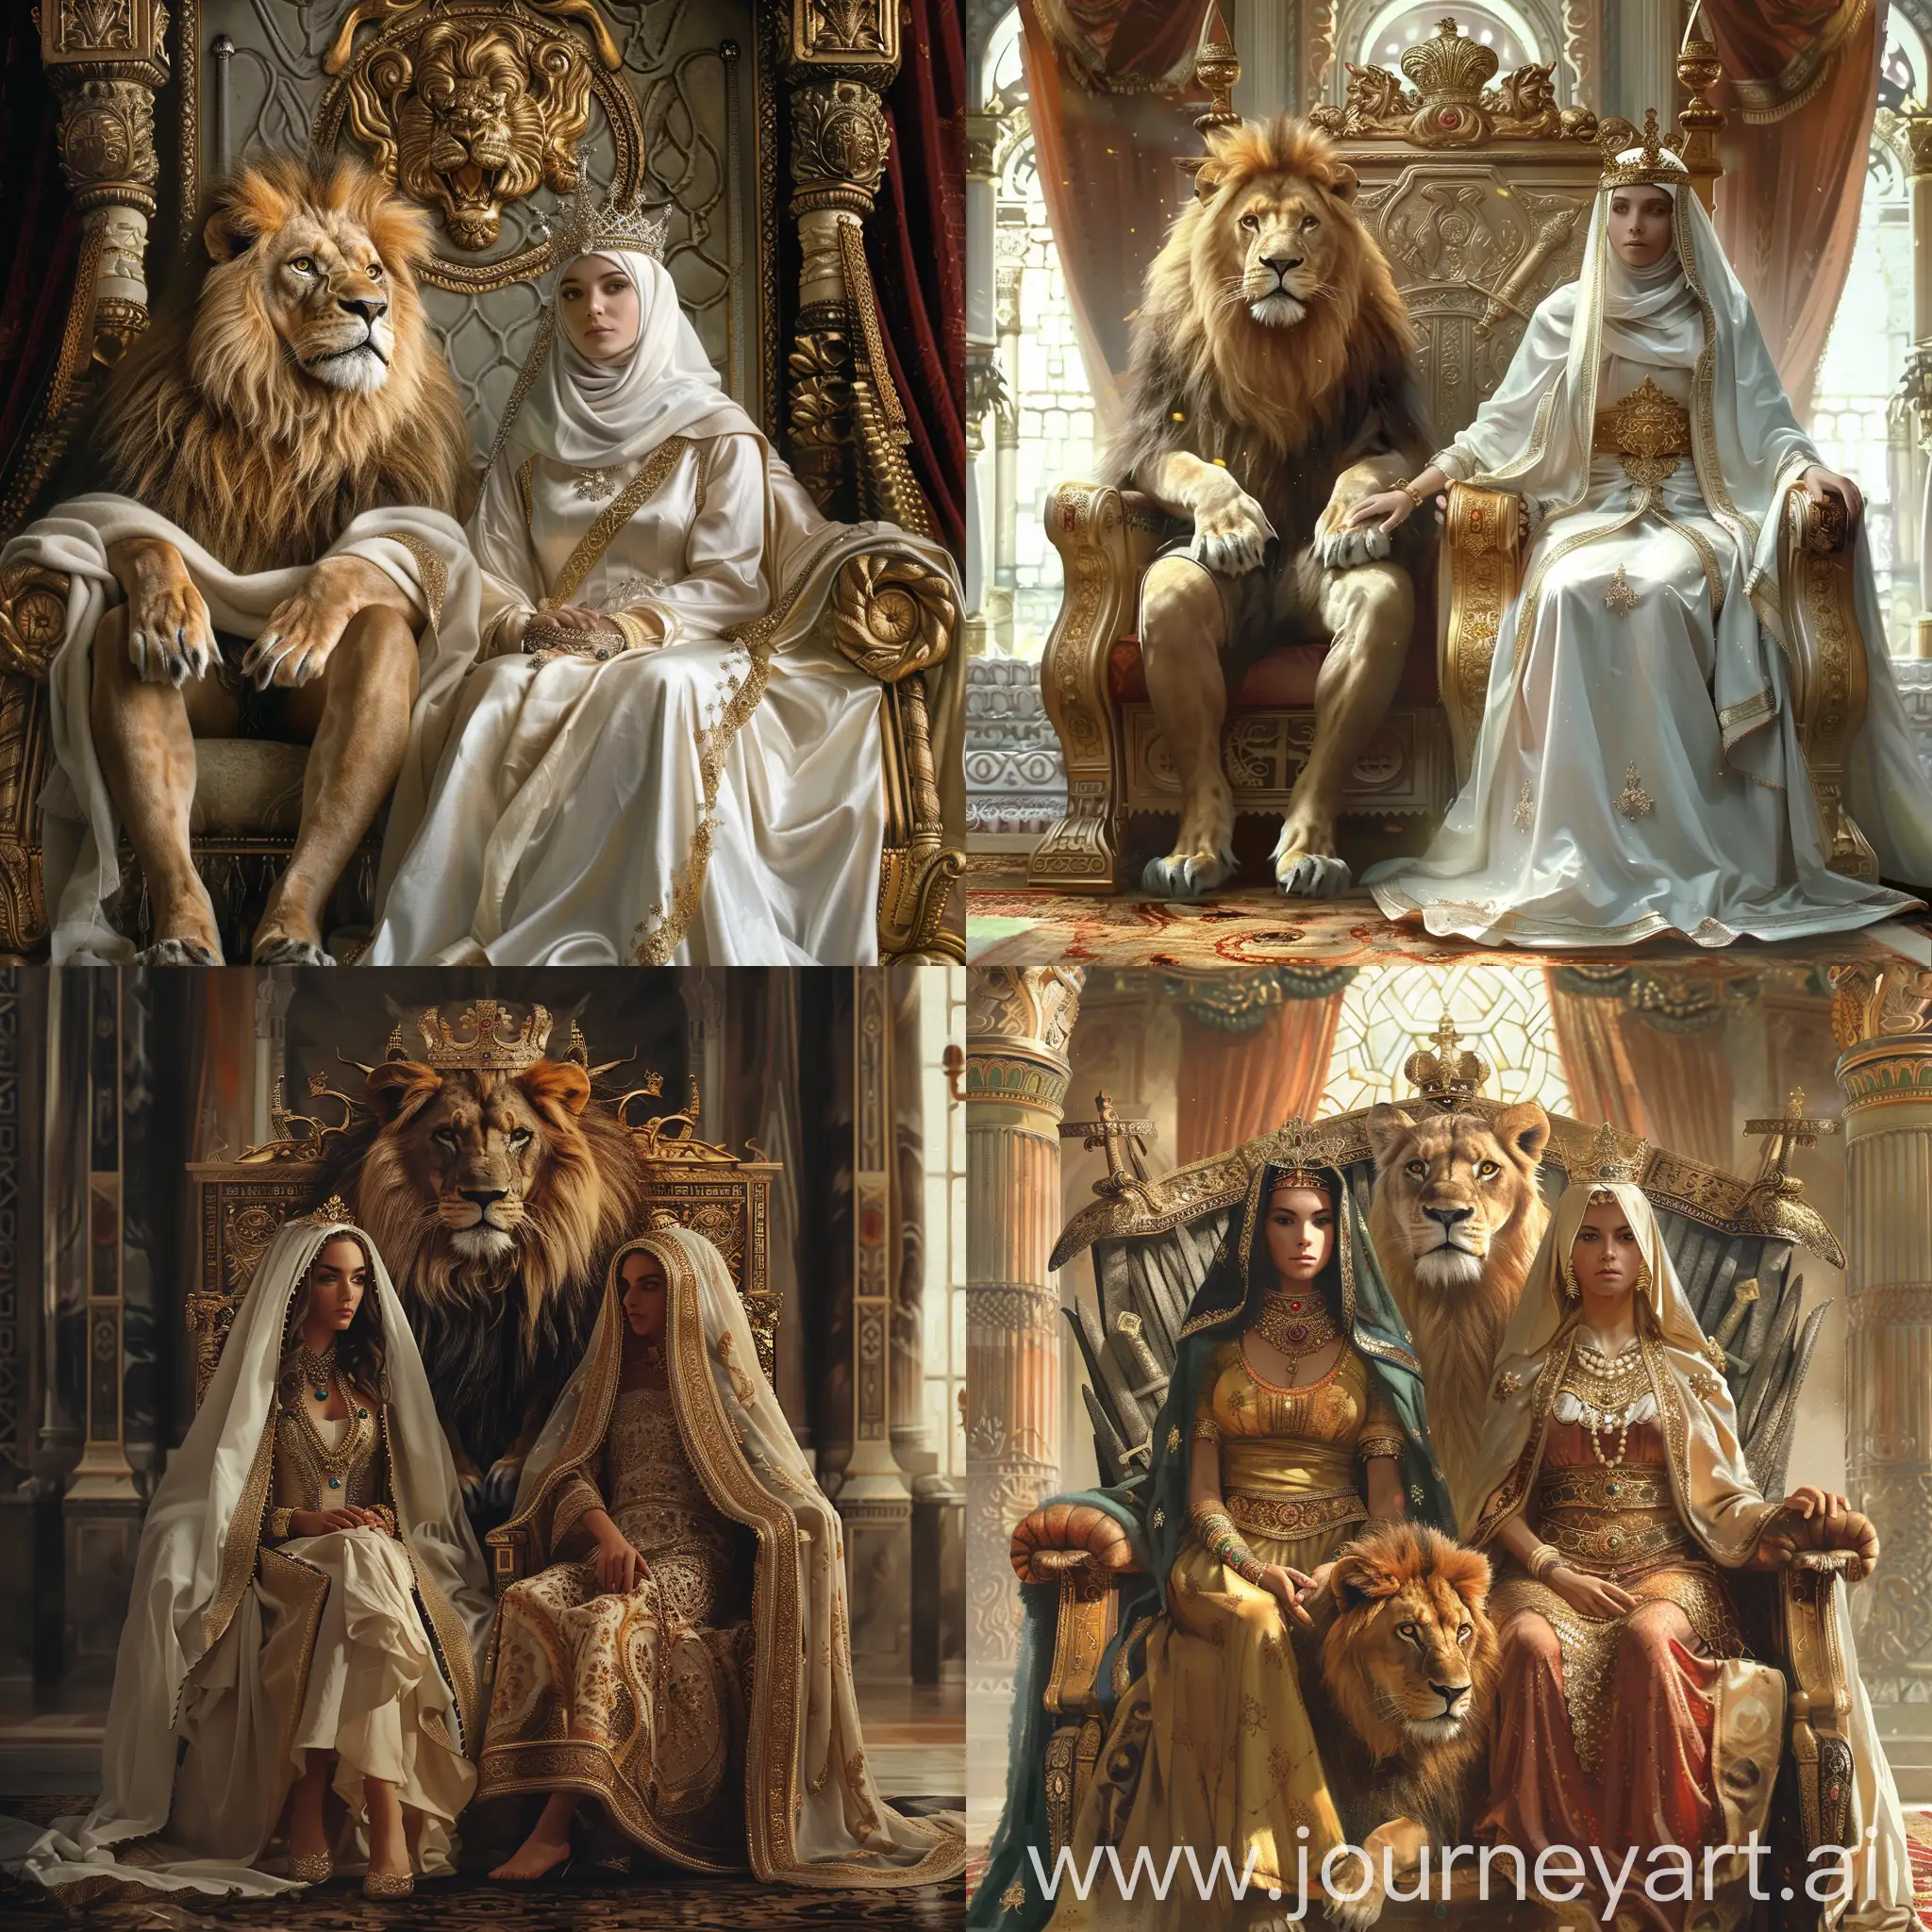 both woman with Lion king sitting on throne (fantasy), women wears full covered clothes graceful and elegant